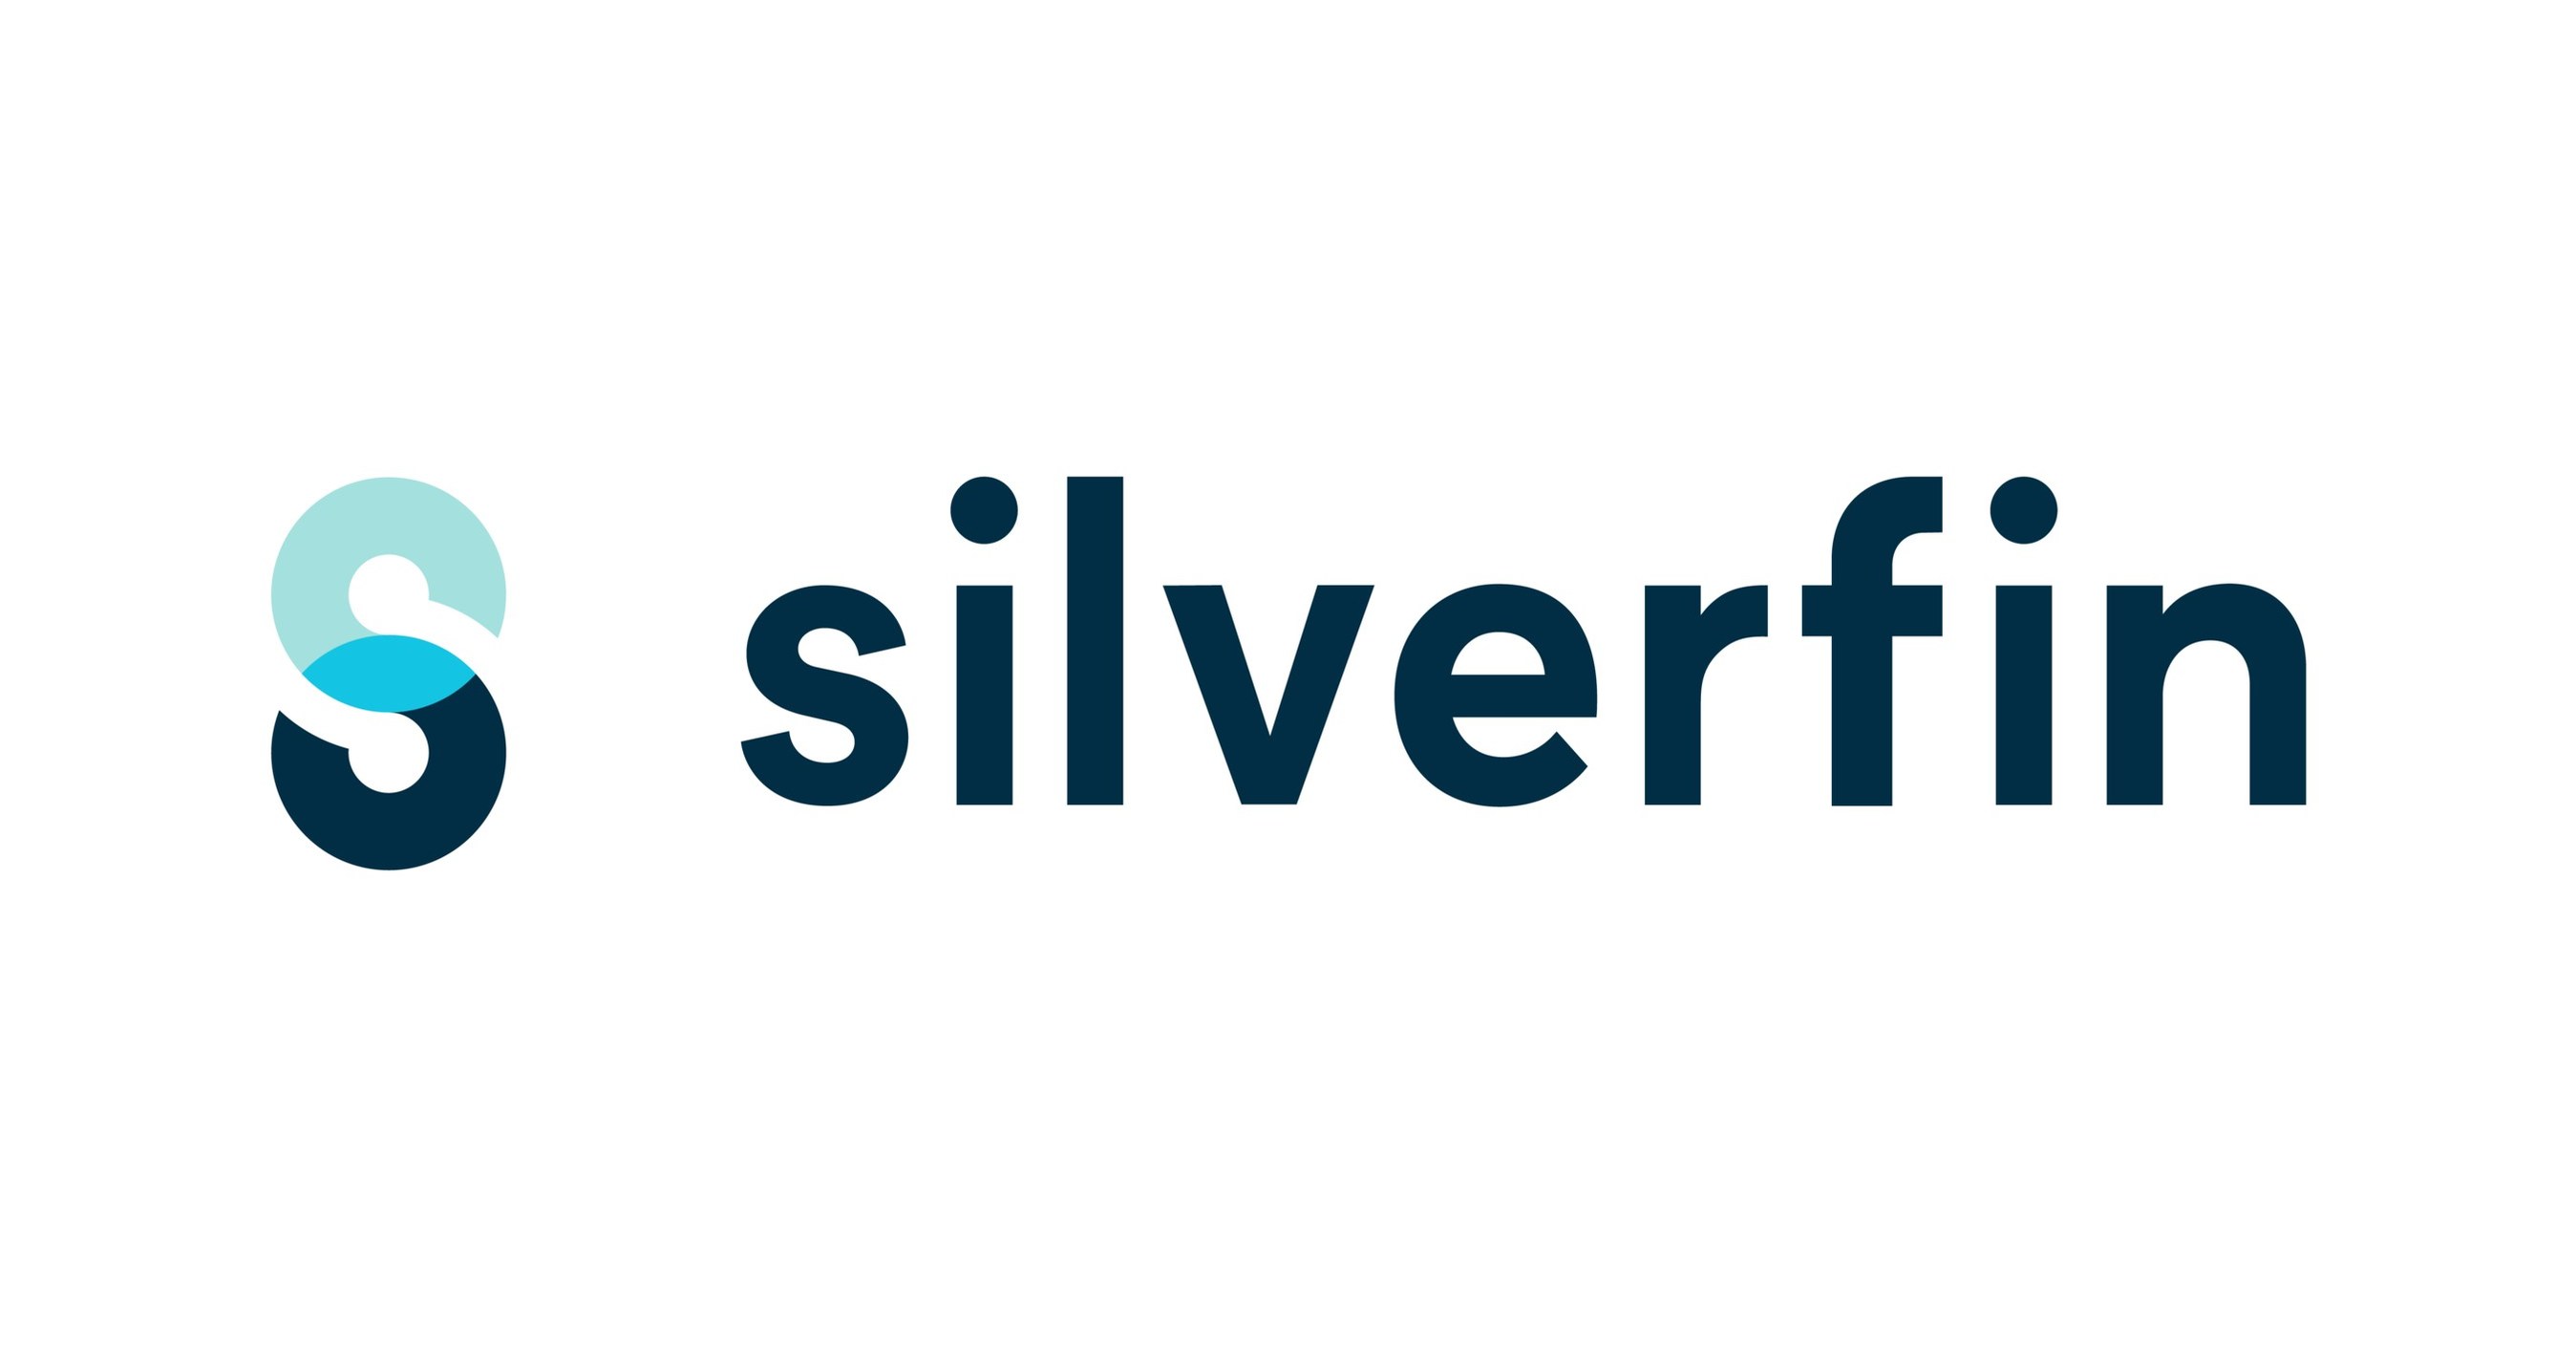 Silverfin Raises Series B Investment Led by Hg to Accelerate International  Growth